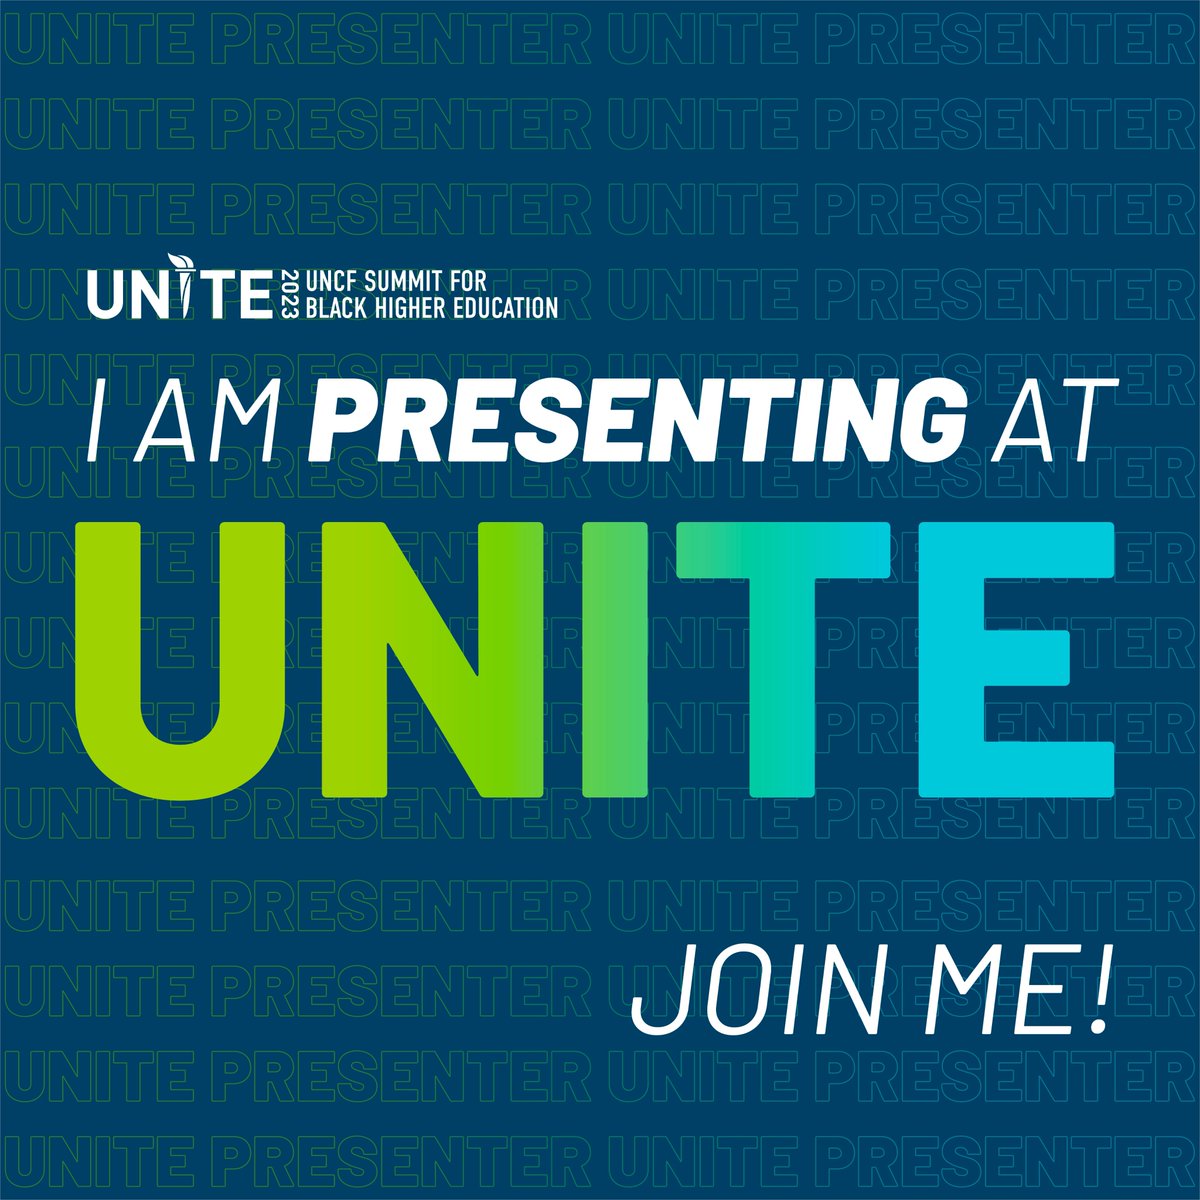 The @chartercollab is presenting at #UNCFUNITE23! Join us today at Empowering Change: Insights from Charter School and HBCU Partnerships, 2:15 PM - 3:30 PM ET with @sekoubiddle, @uncf #uncfK12, @DrNinaLGilbert of @morehouse. Remember: #ThereIsNoHigherEdWithoutK12 #EverRising